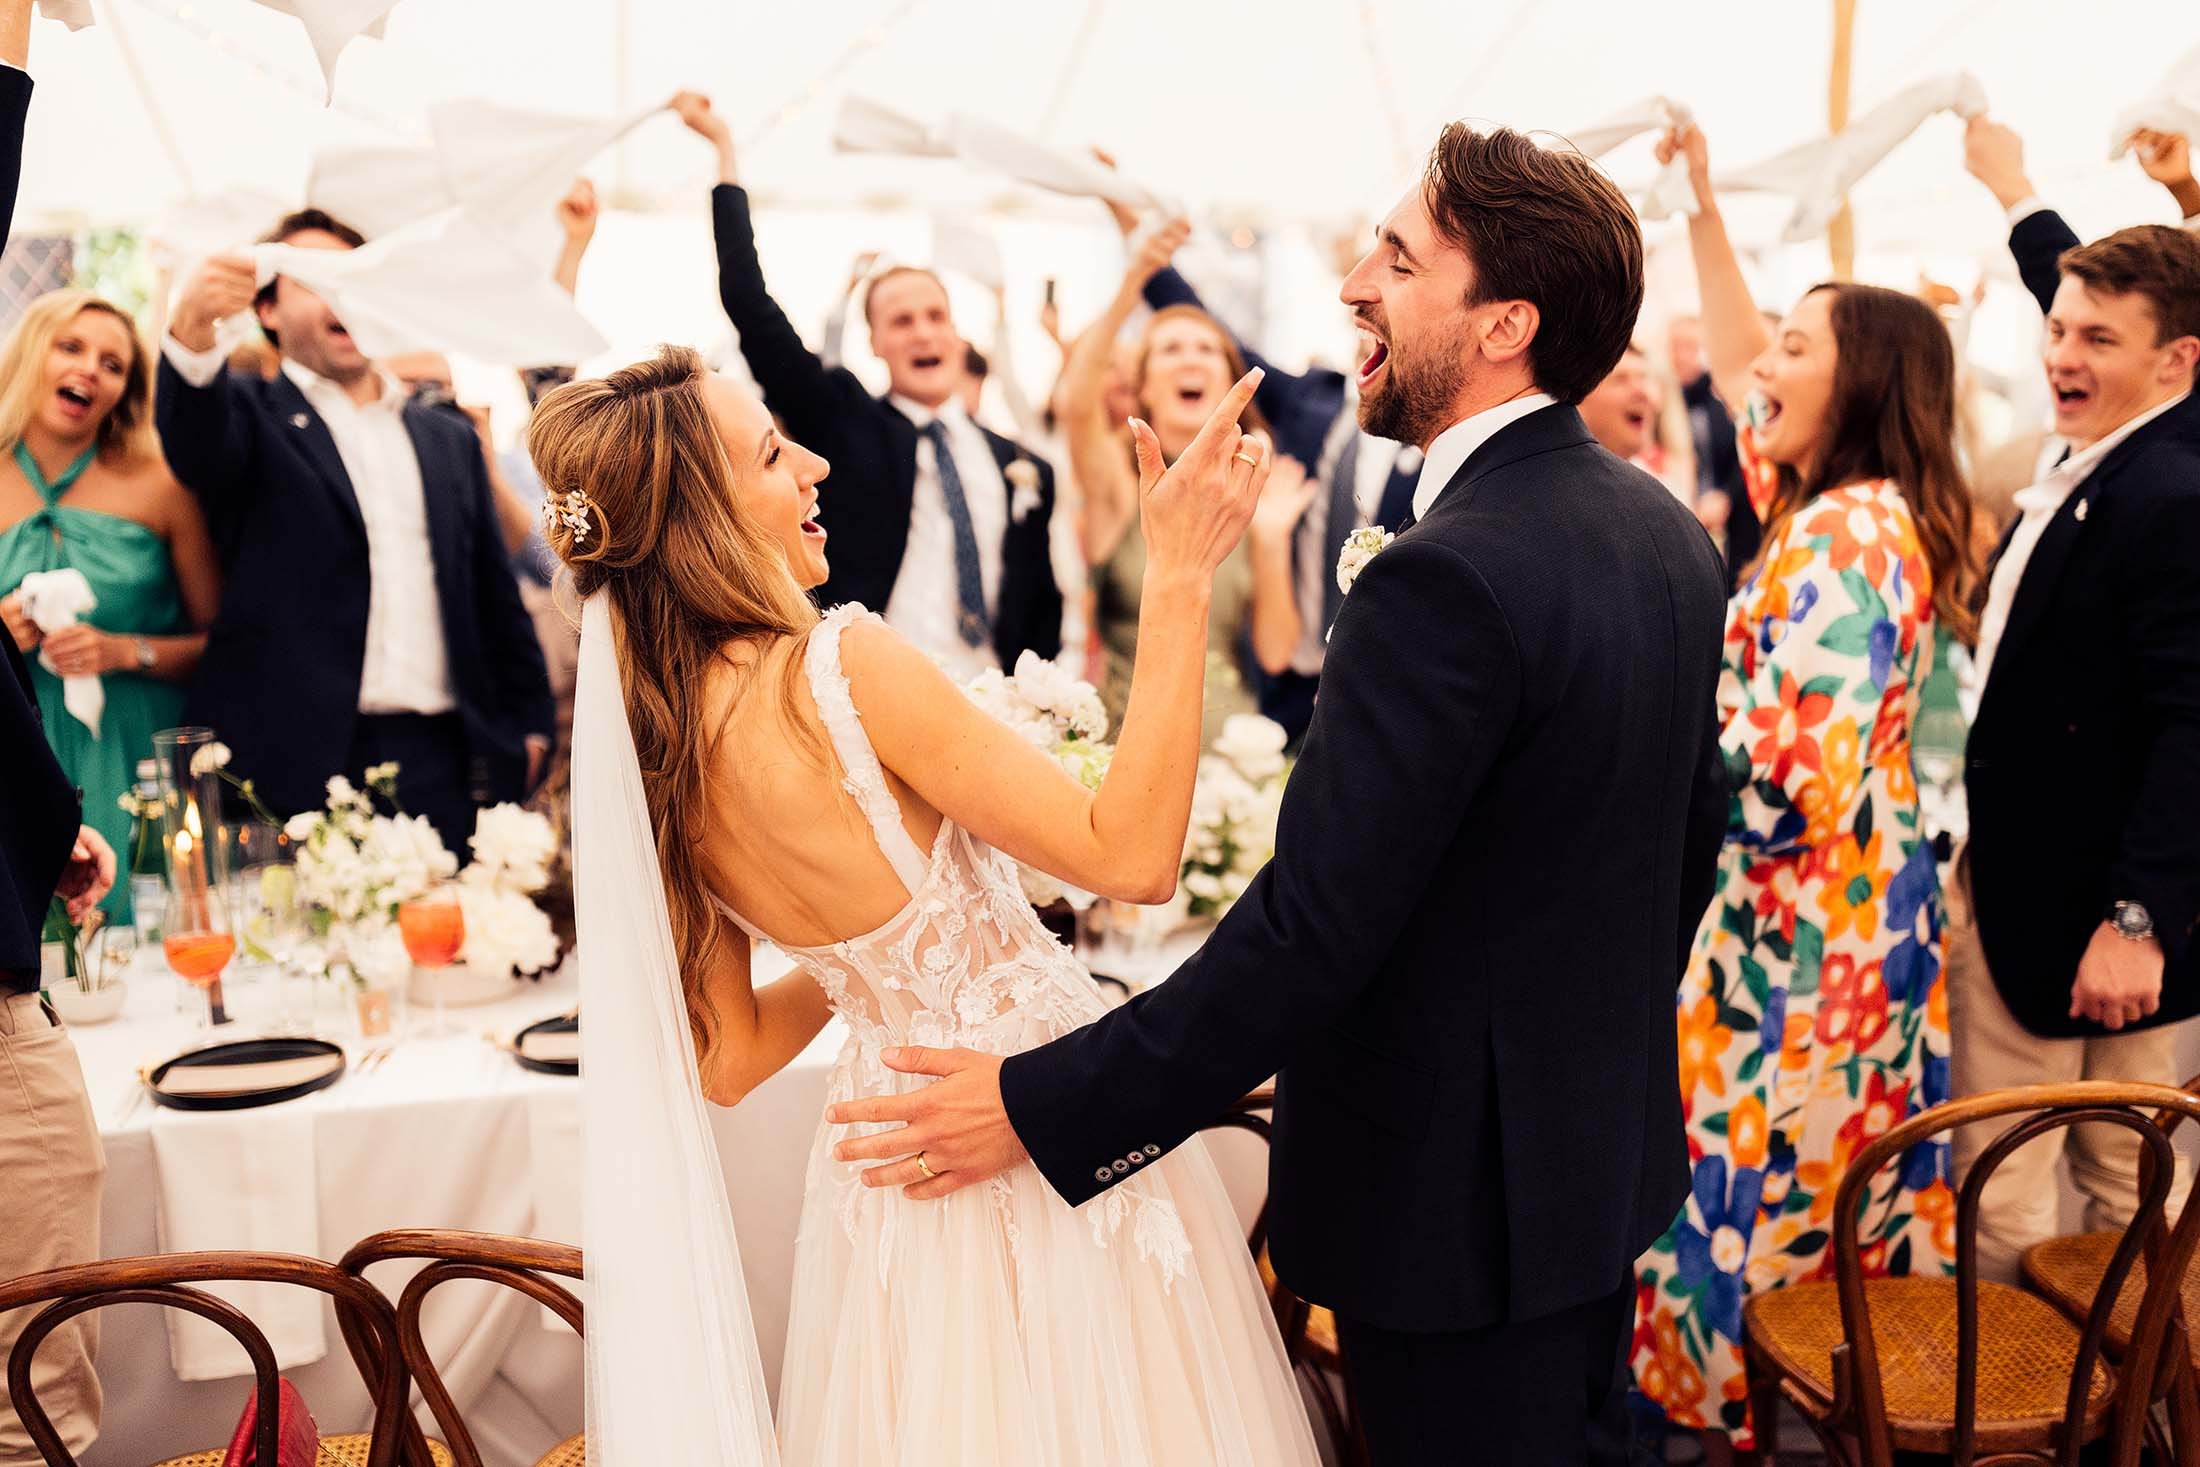 couple arrive at destination wedding reception with guests dancing in background